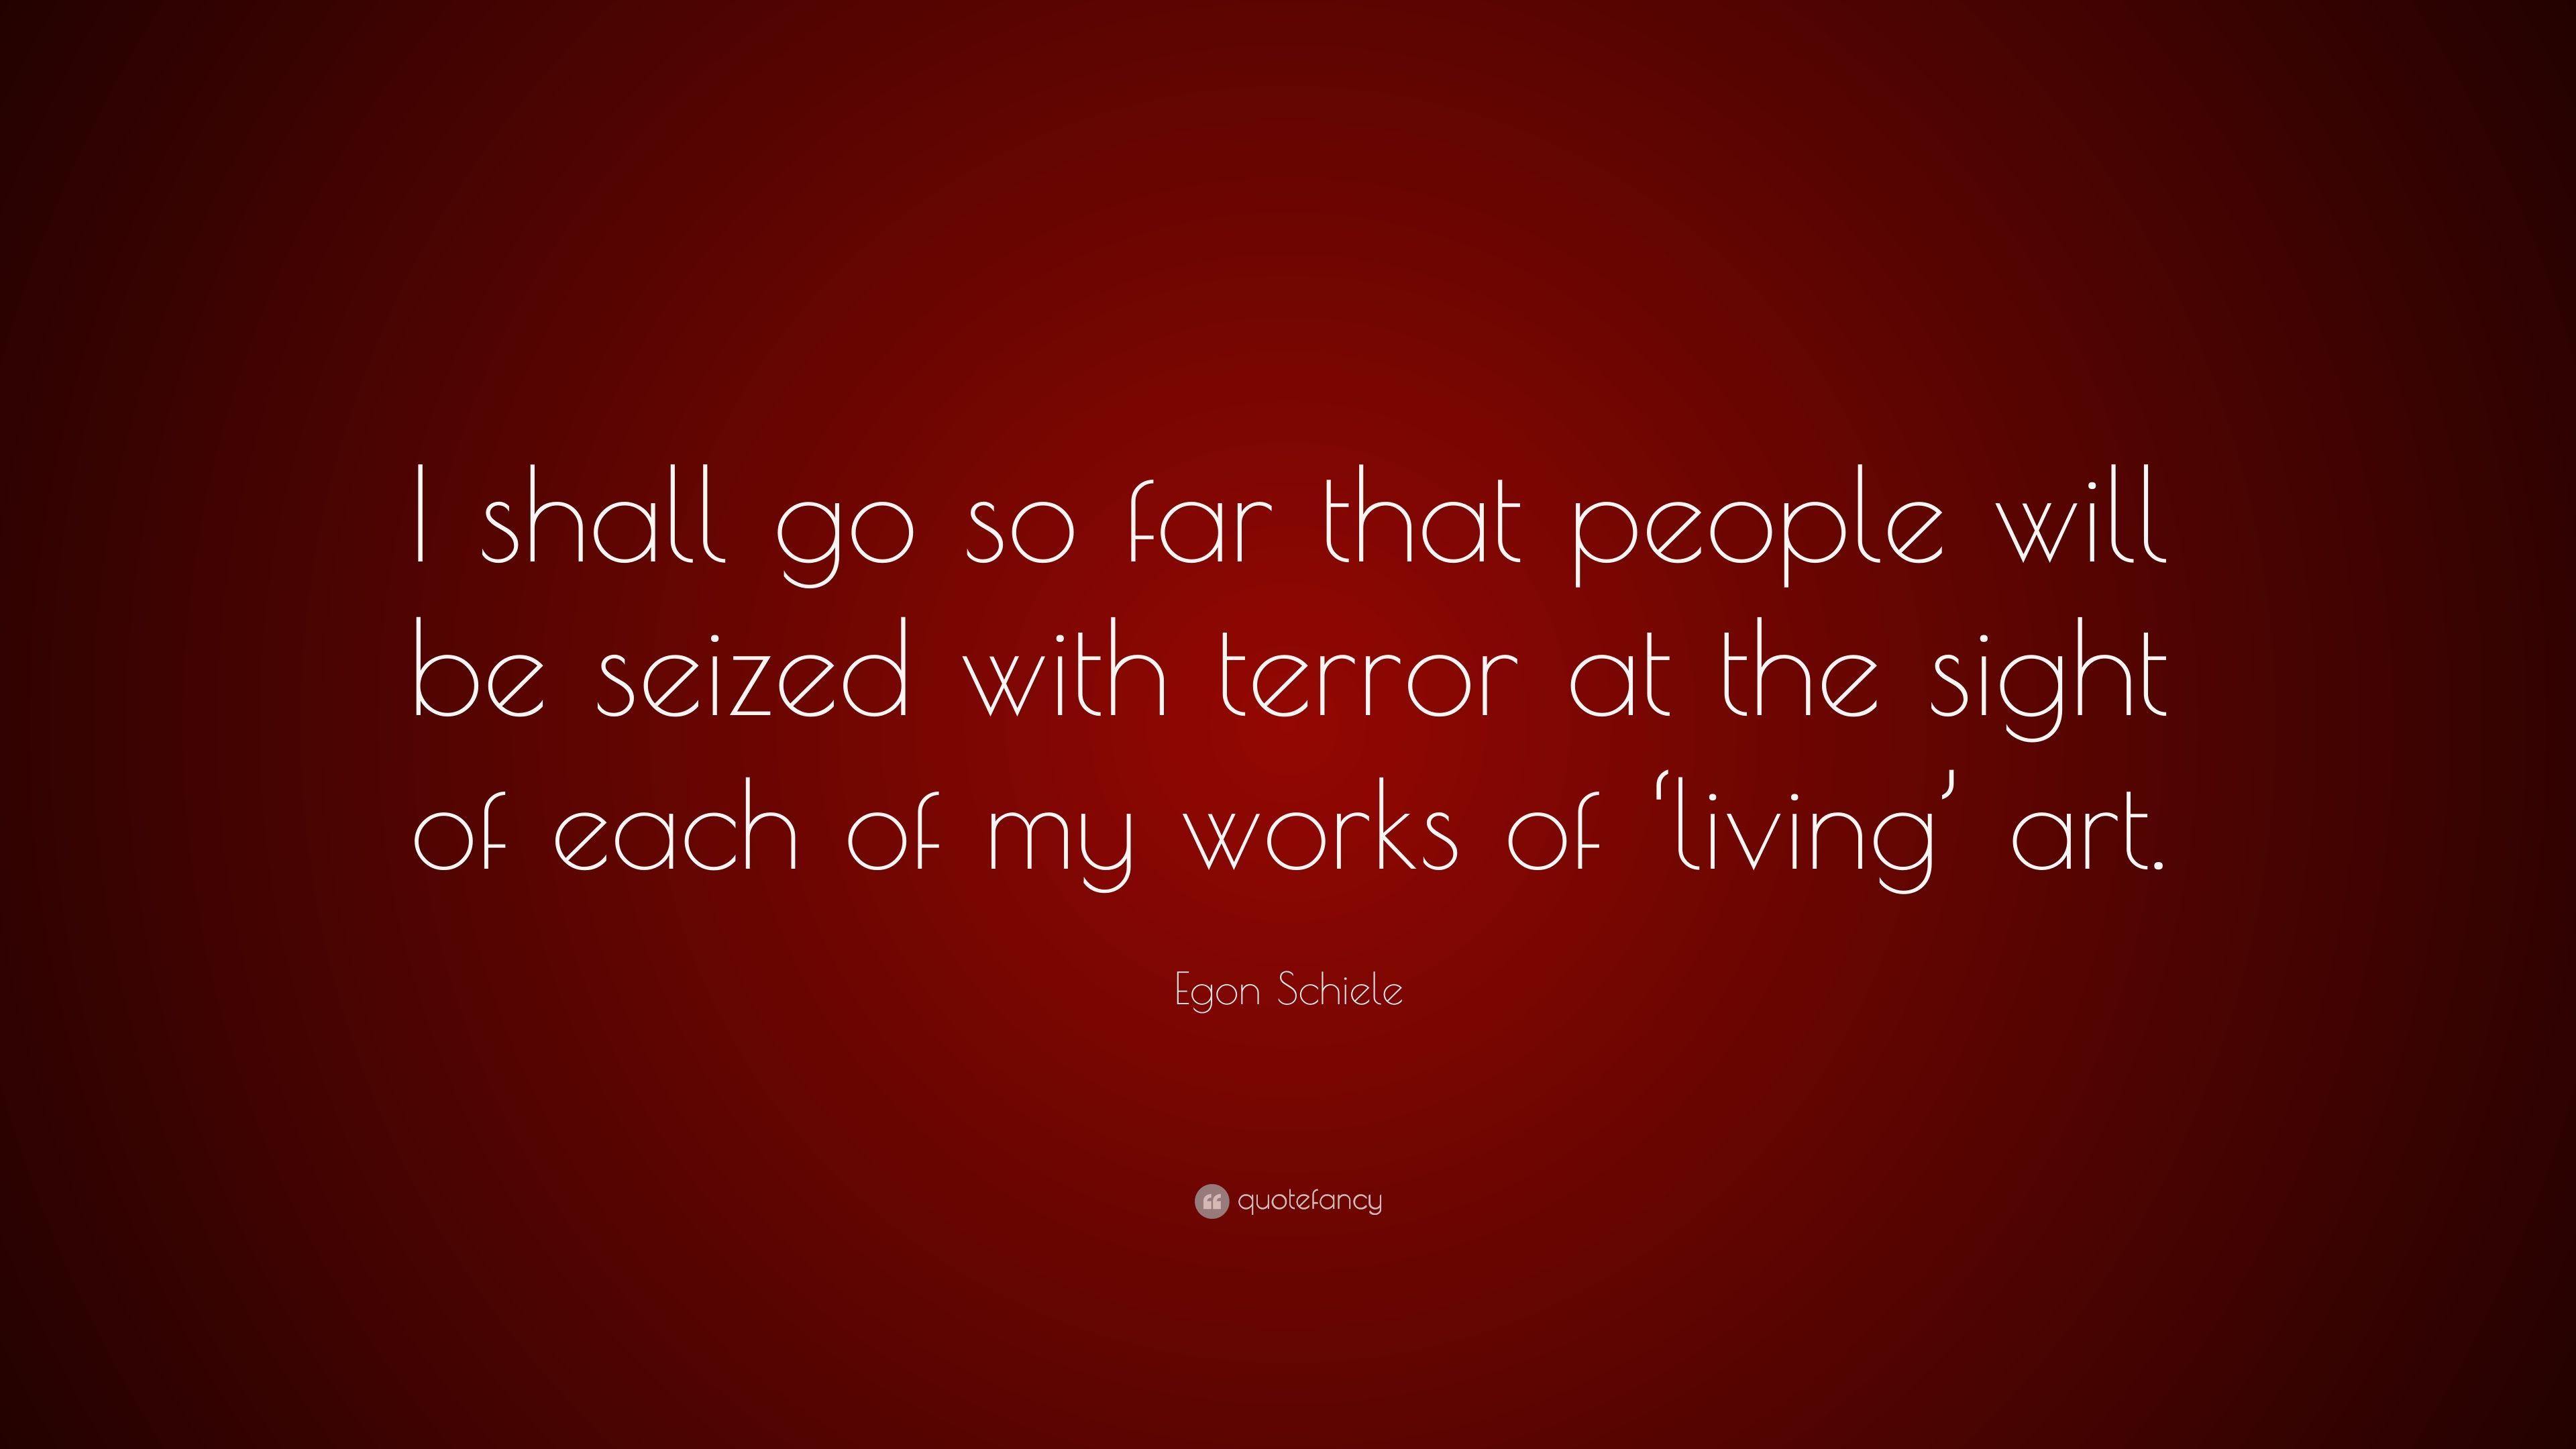 Egon Schiele Quote: “I shall go so far that people will be seized